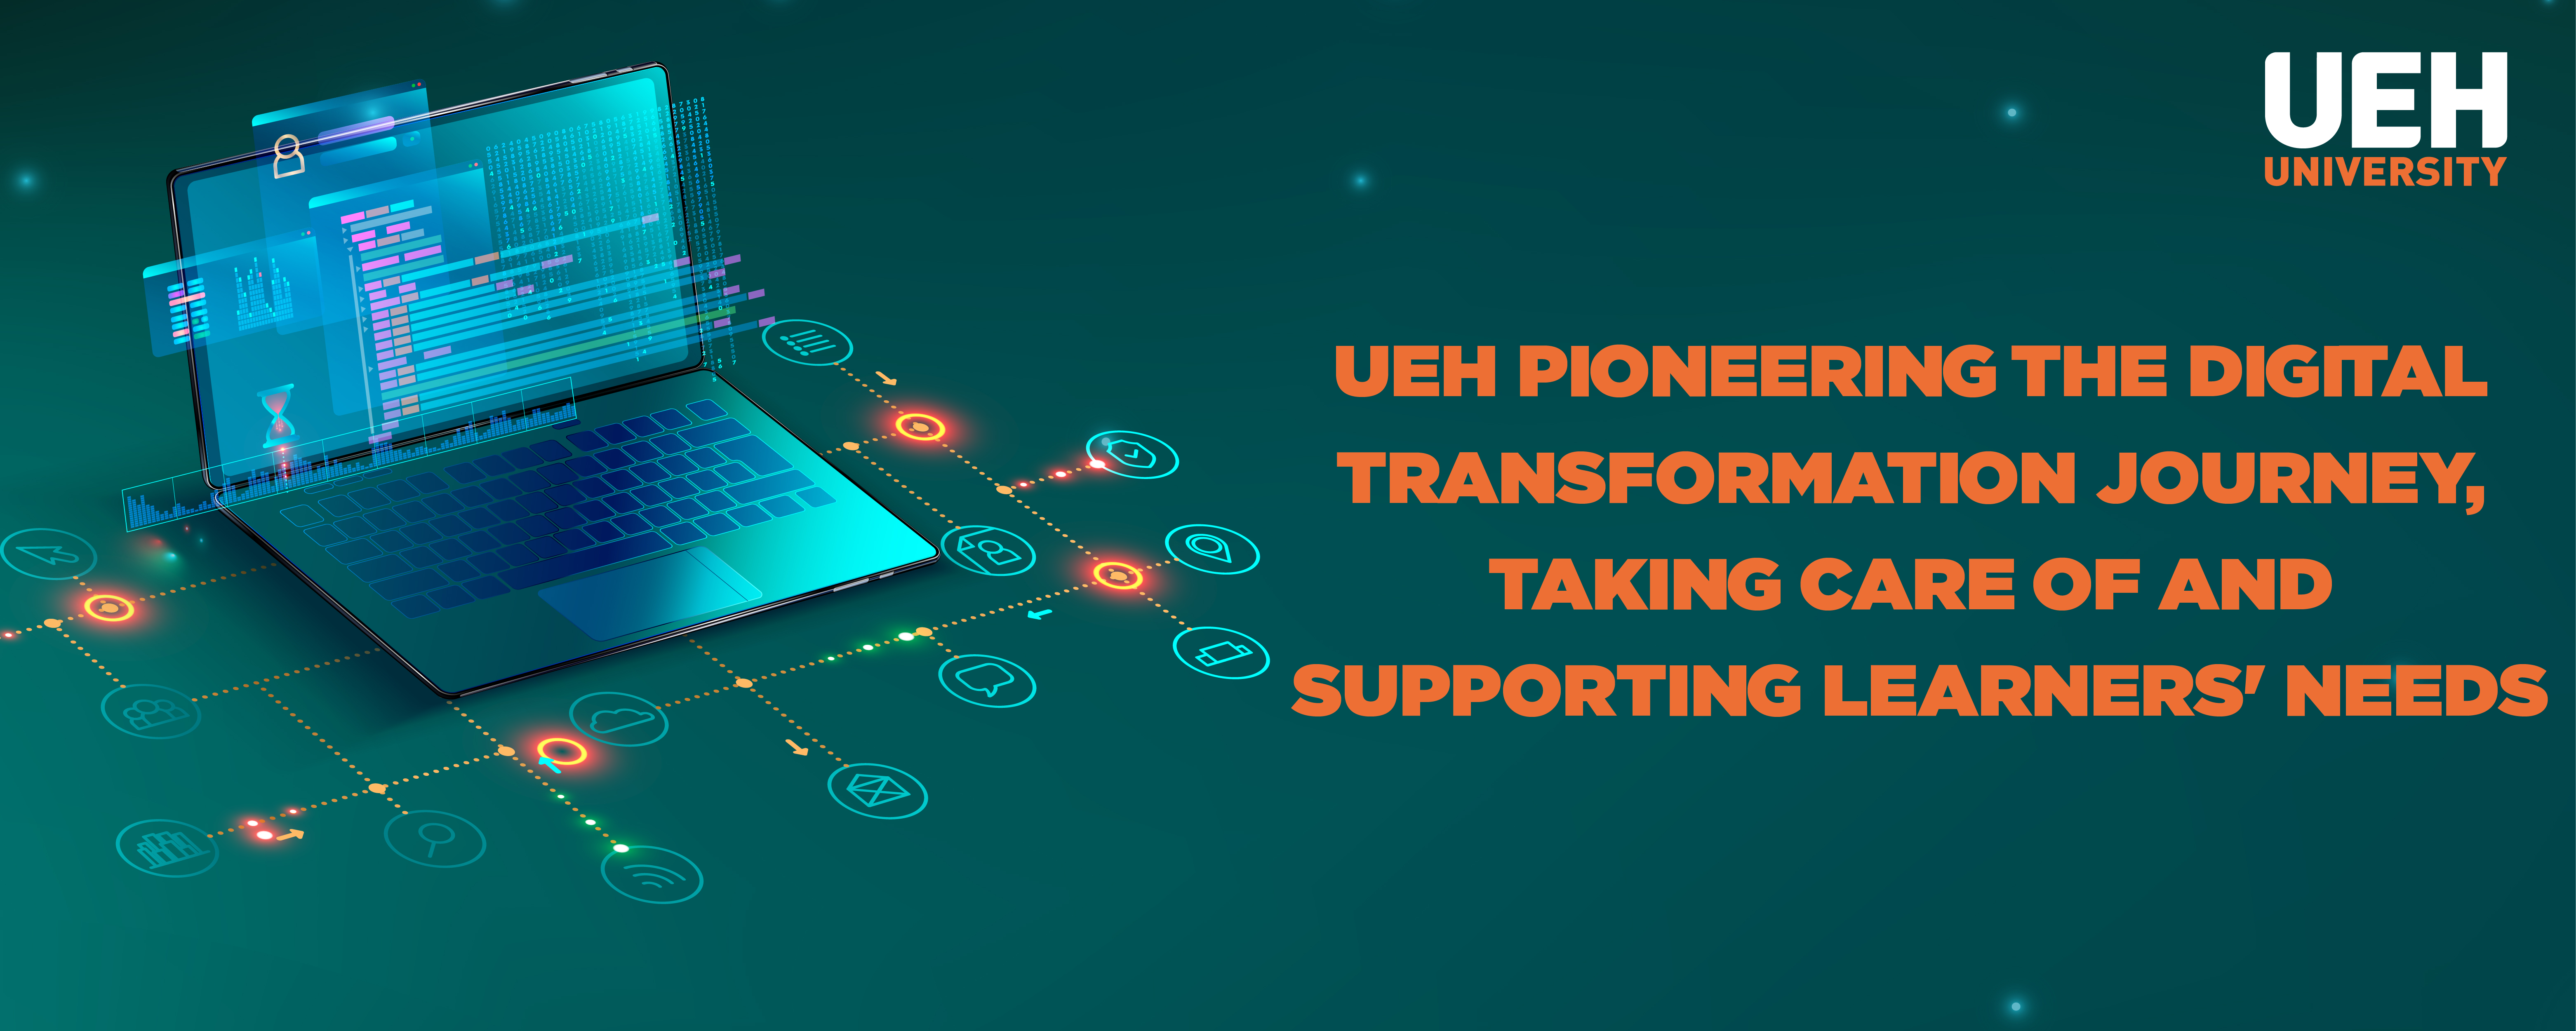 UEH pioneering the digital transformation journey, taking care of and supporting learners' needs